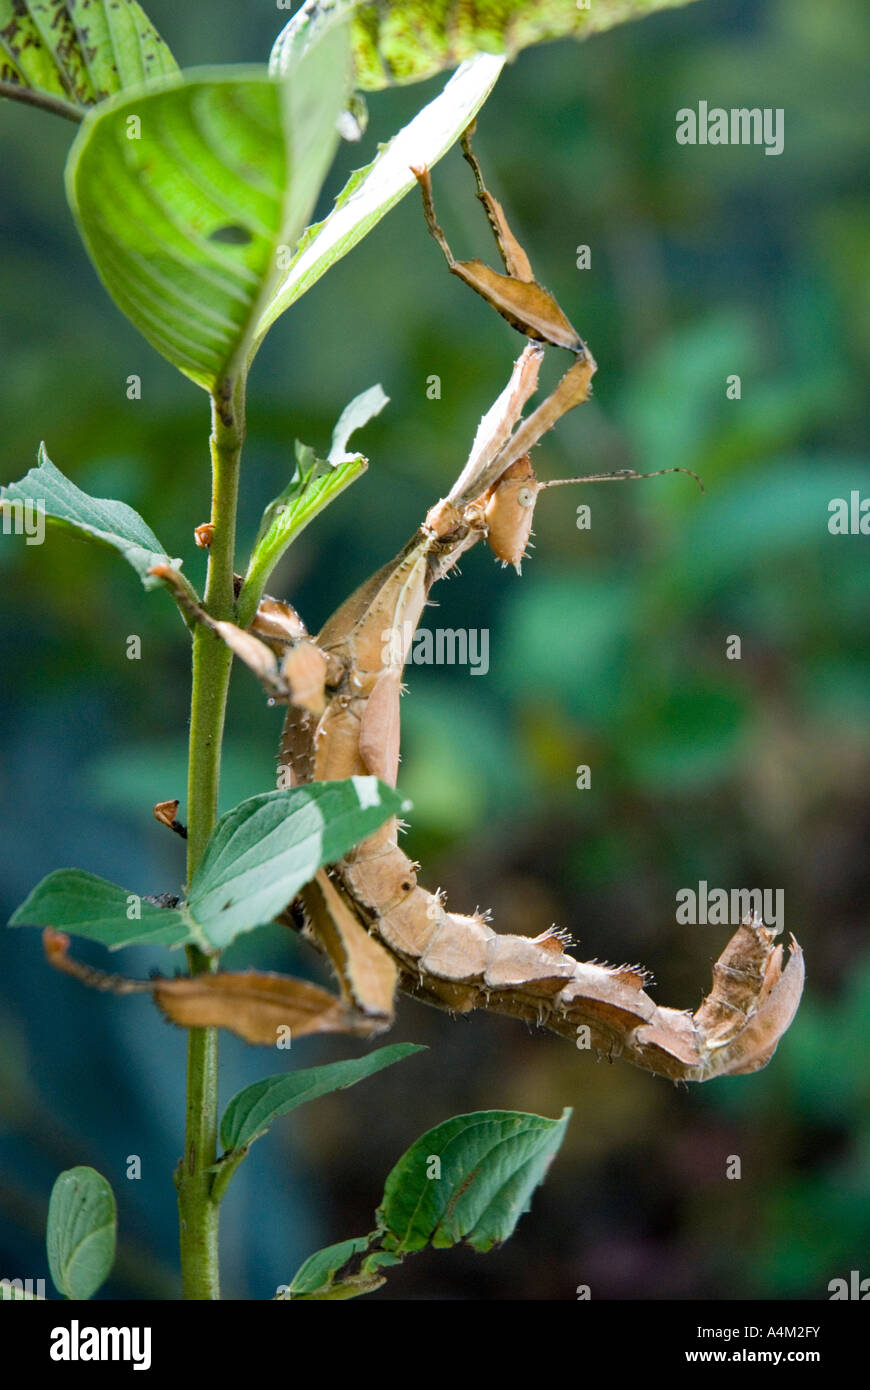 Macleay's Spectre Extatosoma Tiaratum Giant Prickly Leaf Insect Stock Photo